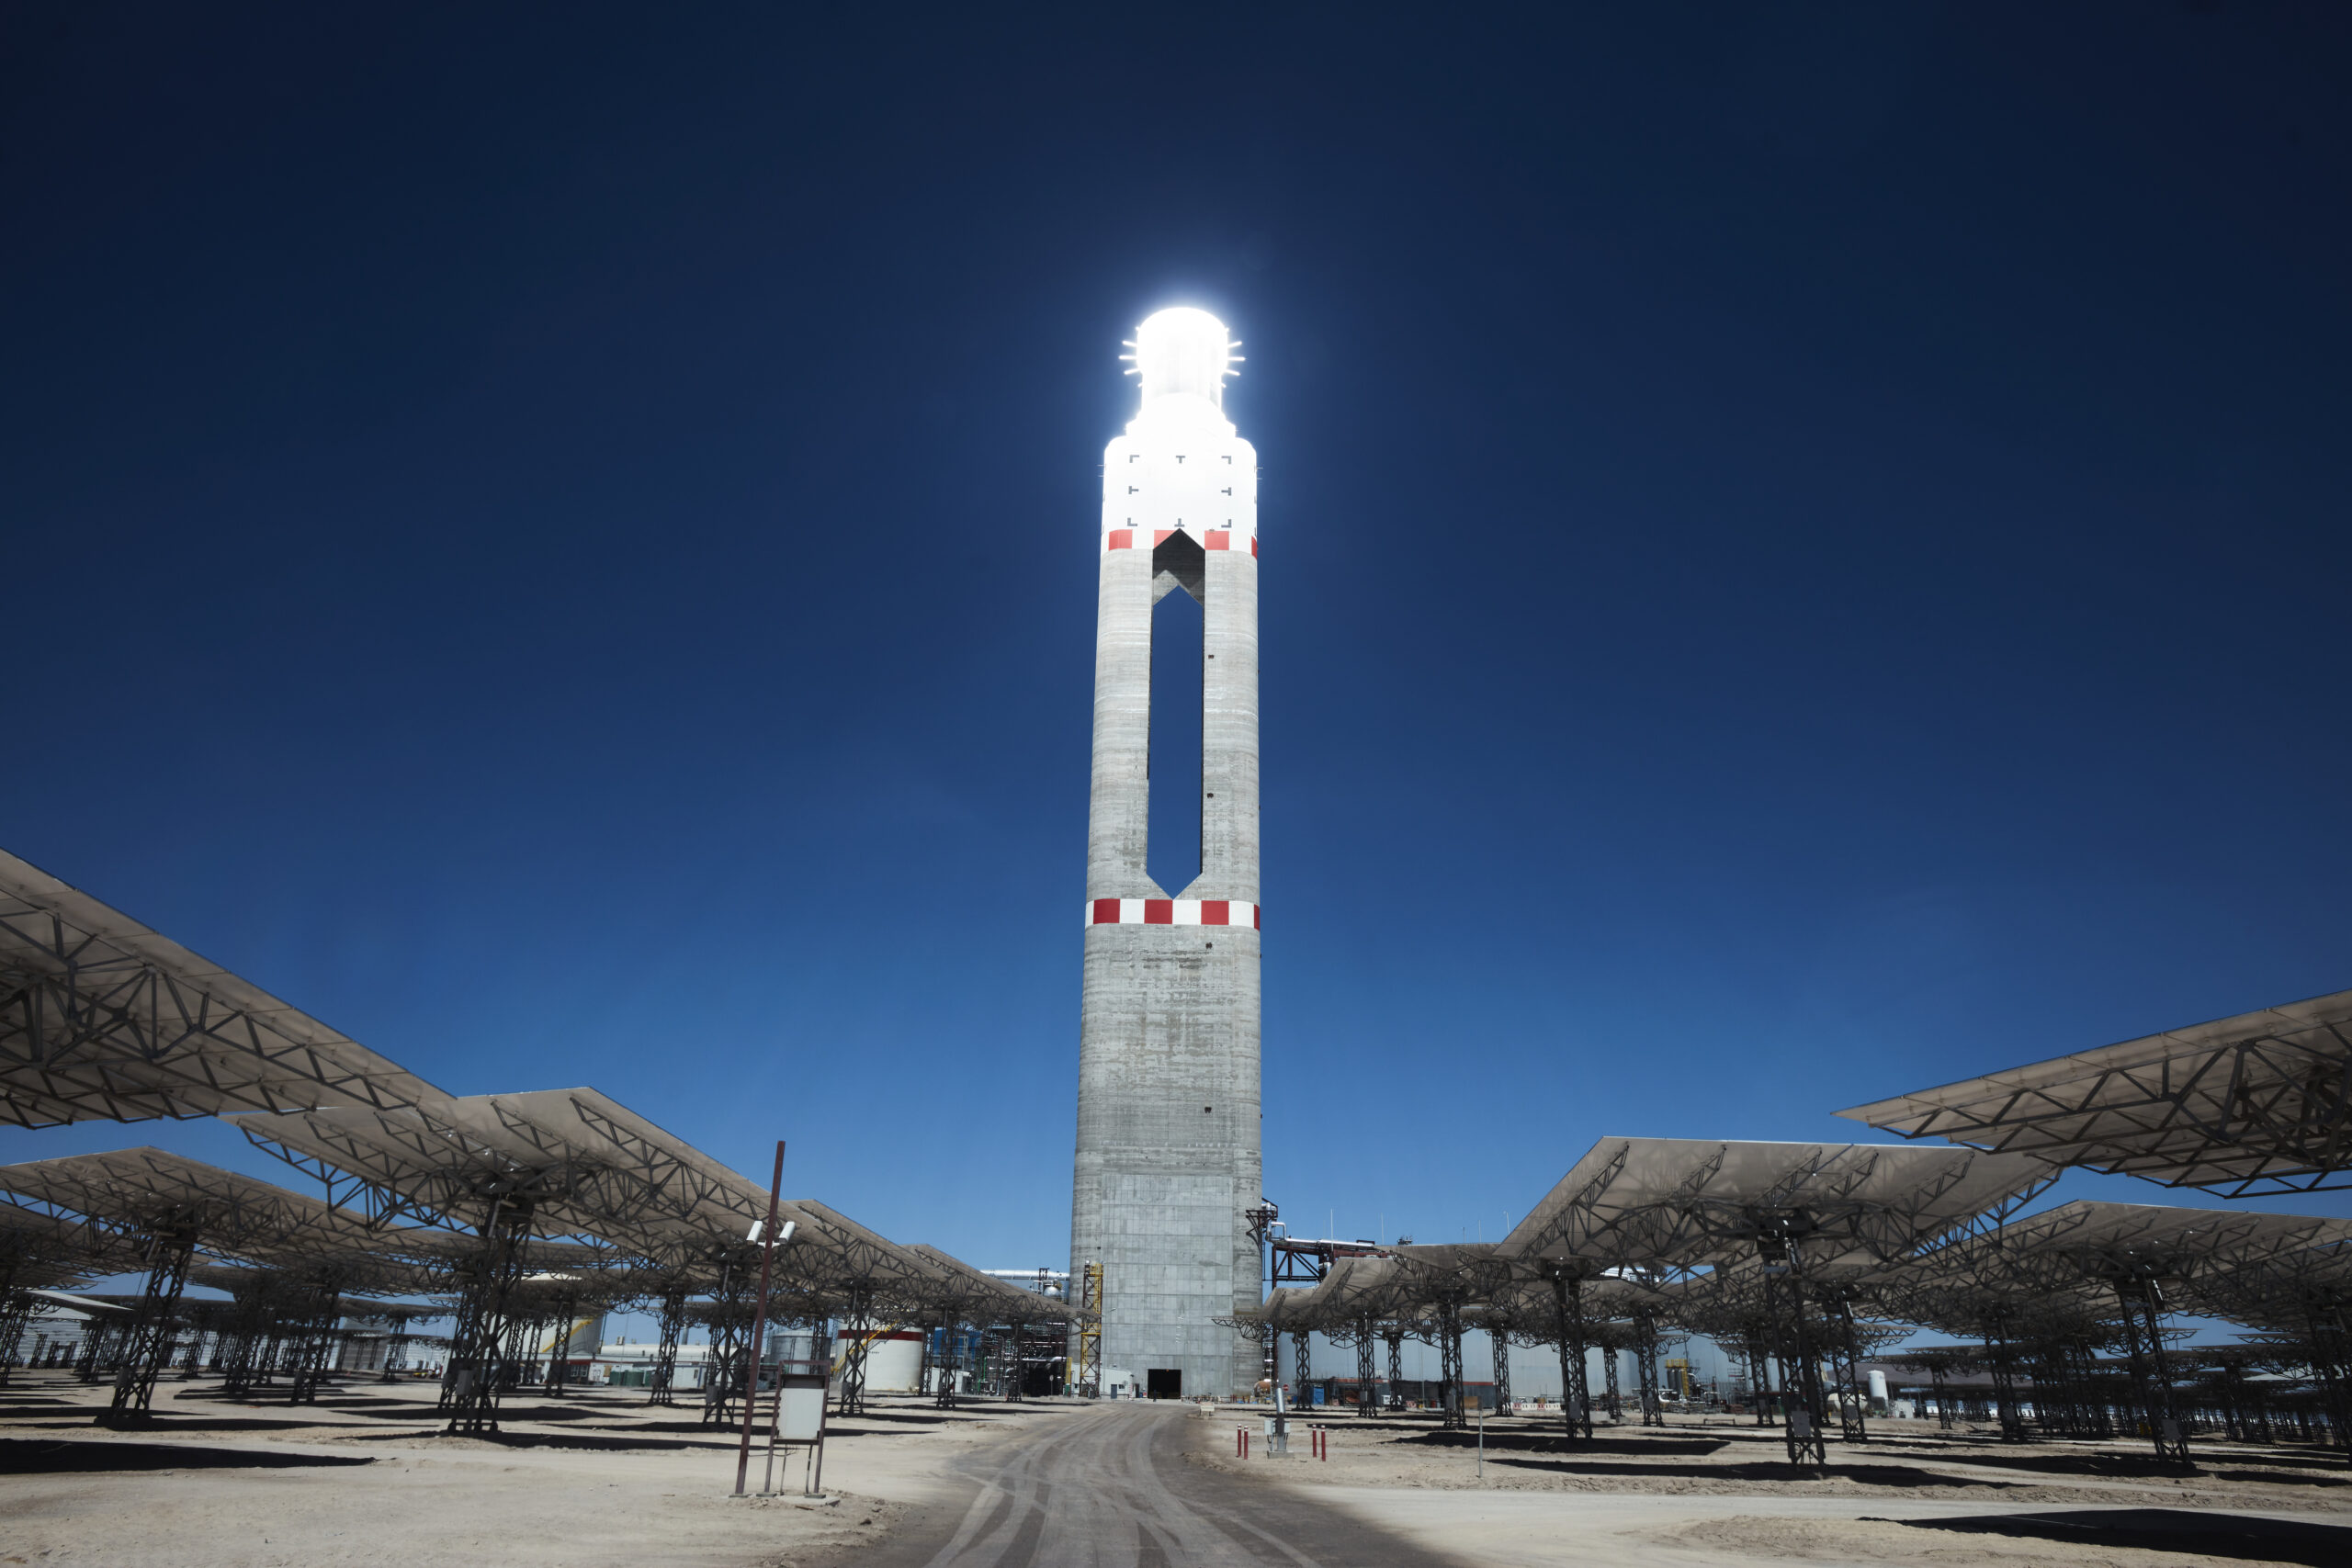 Cerro Dominador successfully synchronizes ITS CSP plant with the chilean electrical system